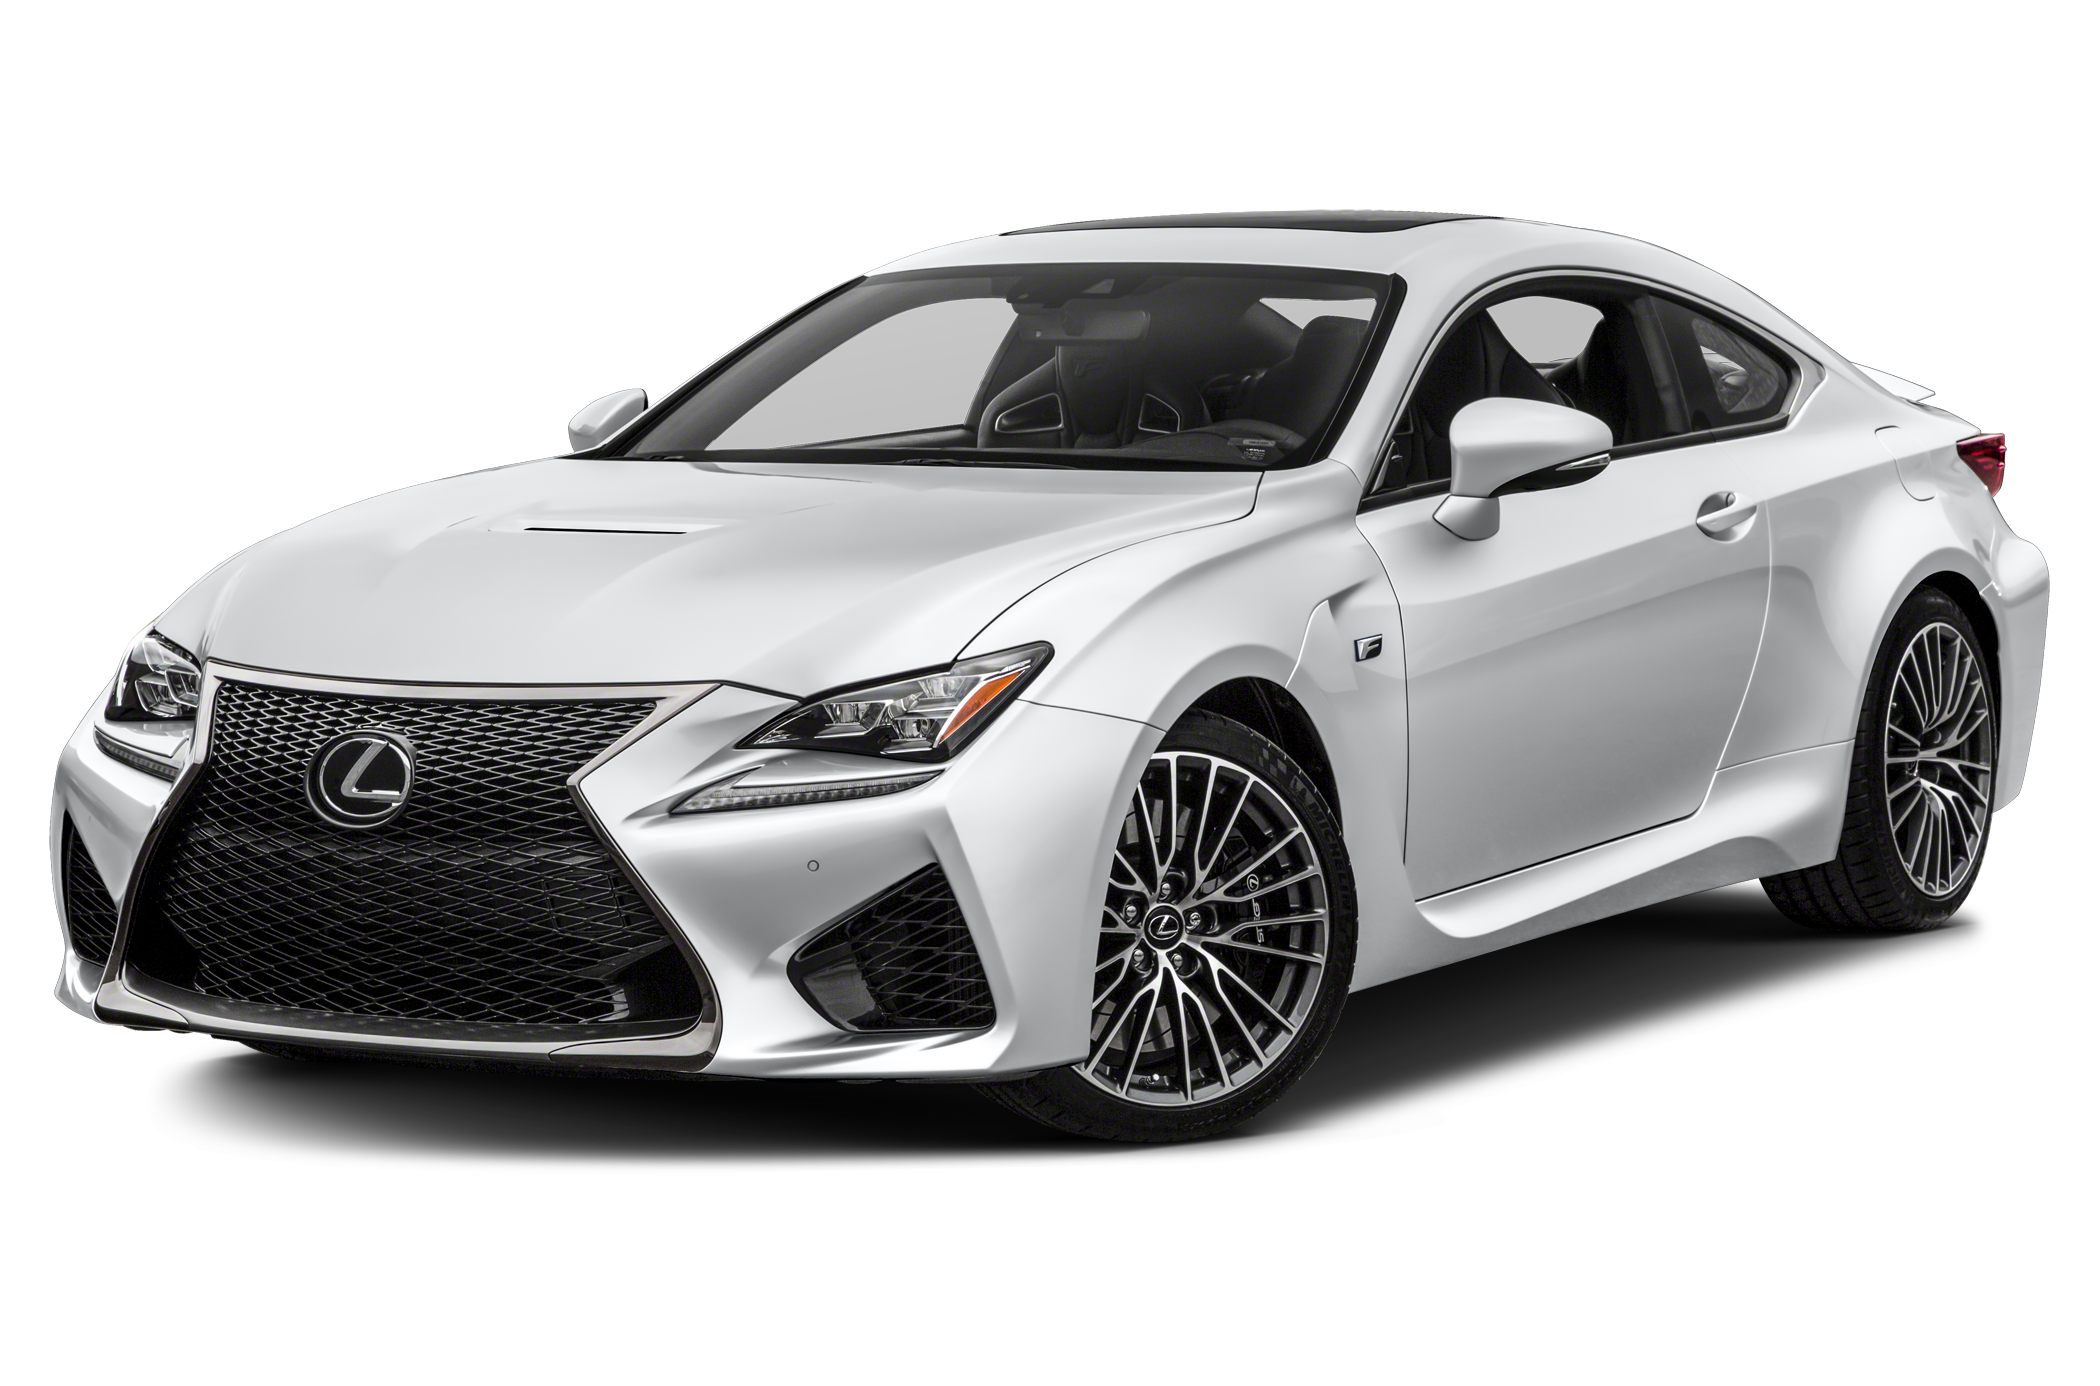 Lexus RC F resurfaces with Carbon Package - Autoblog